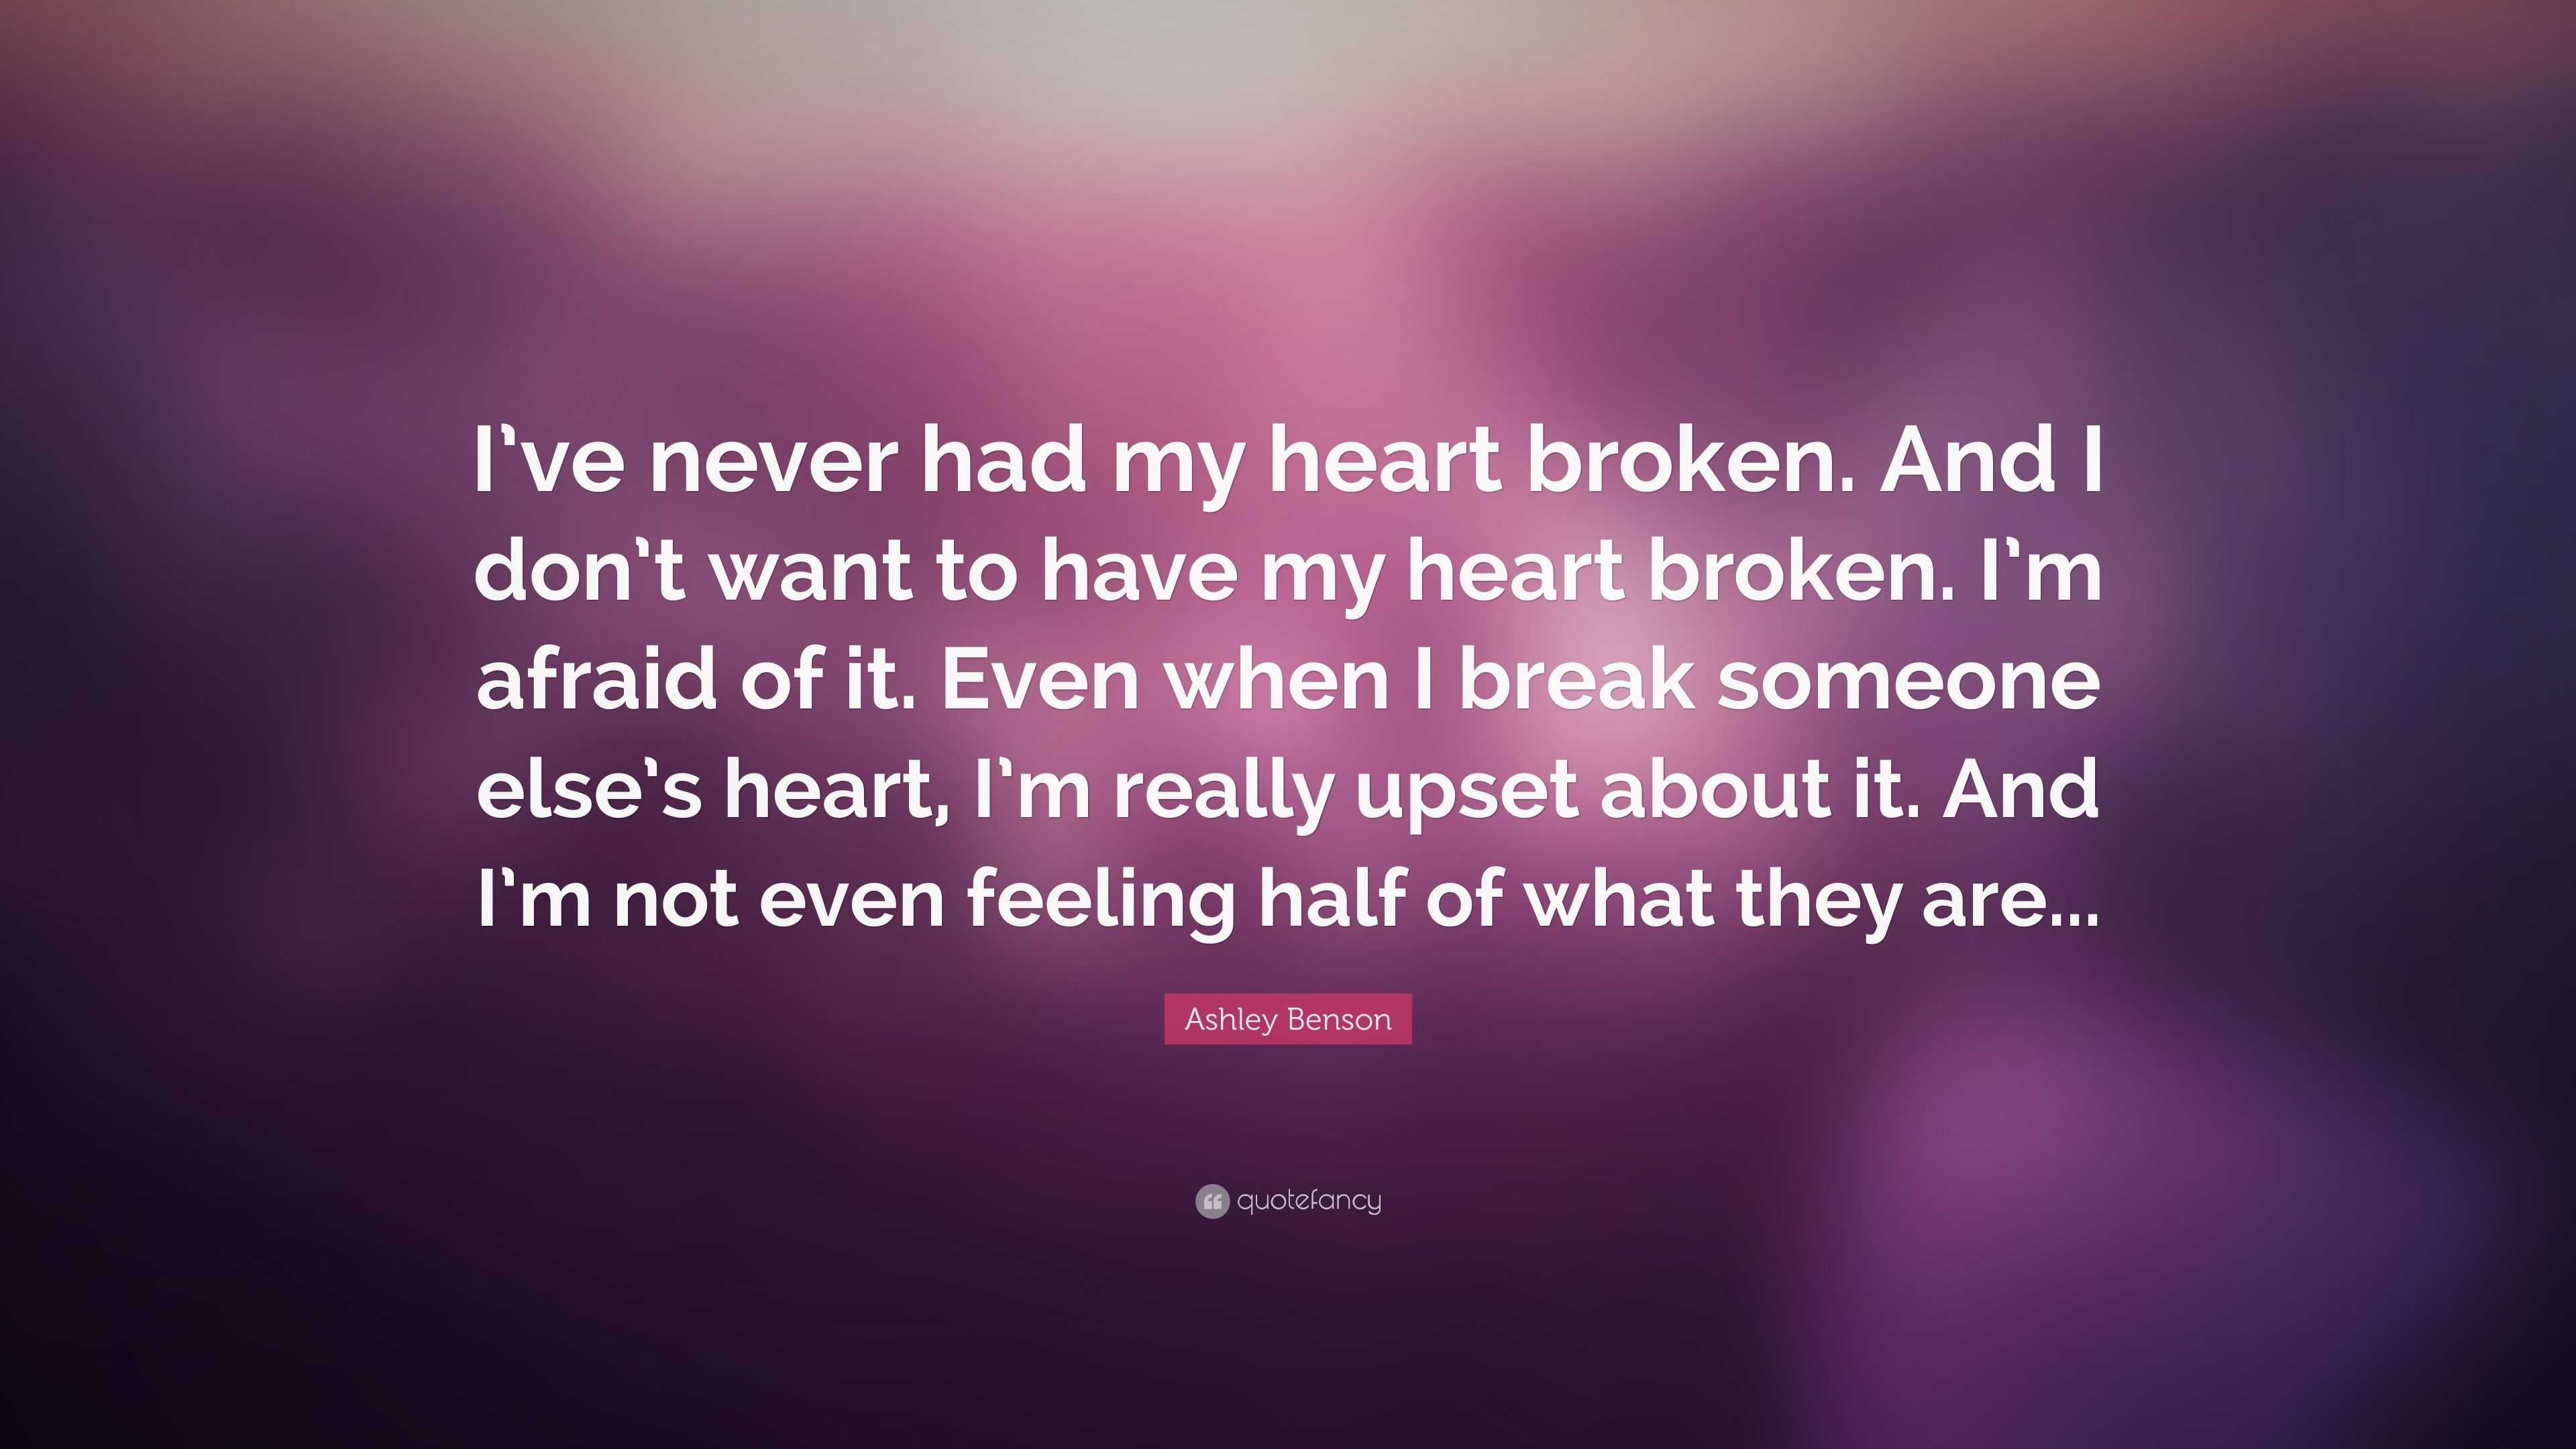 Ashley Benson Quote: “I’ve never had my heart broken. And I don’t want ...